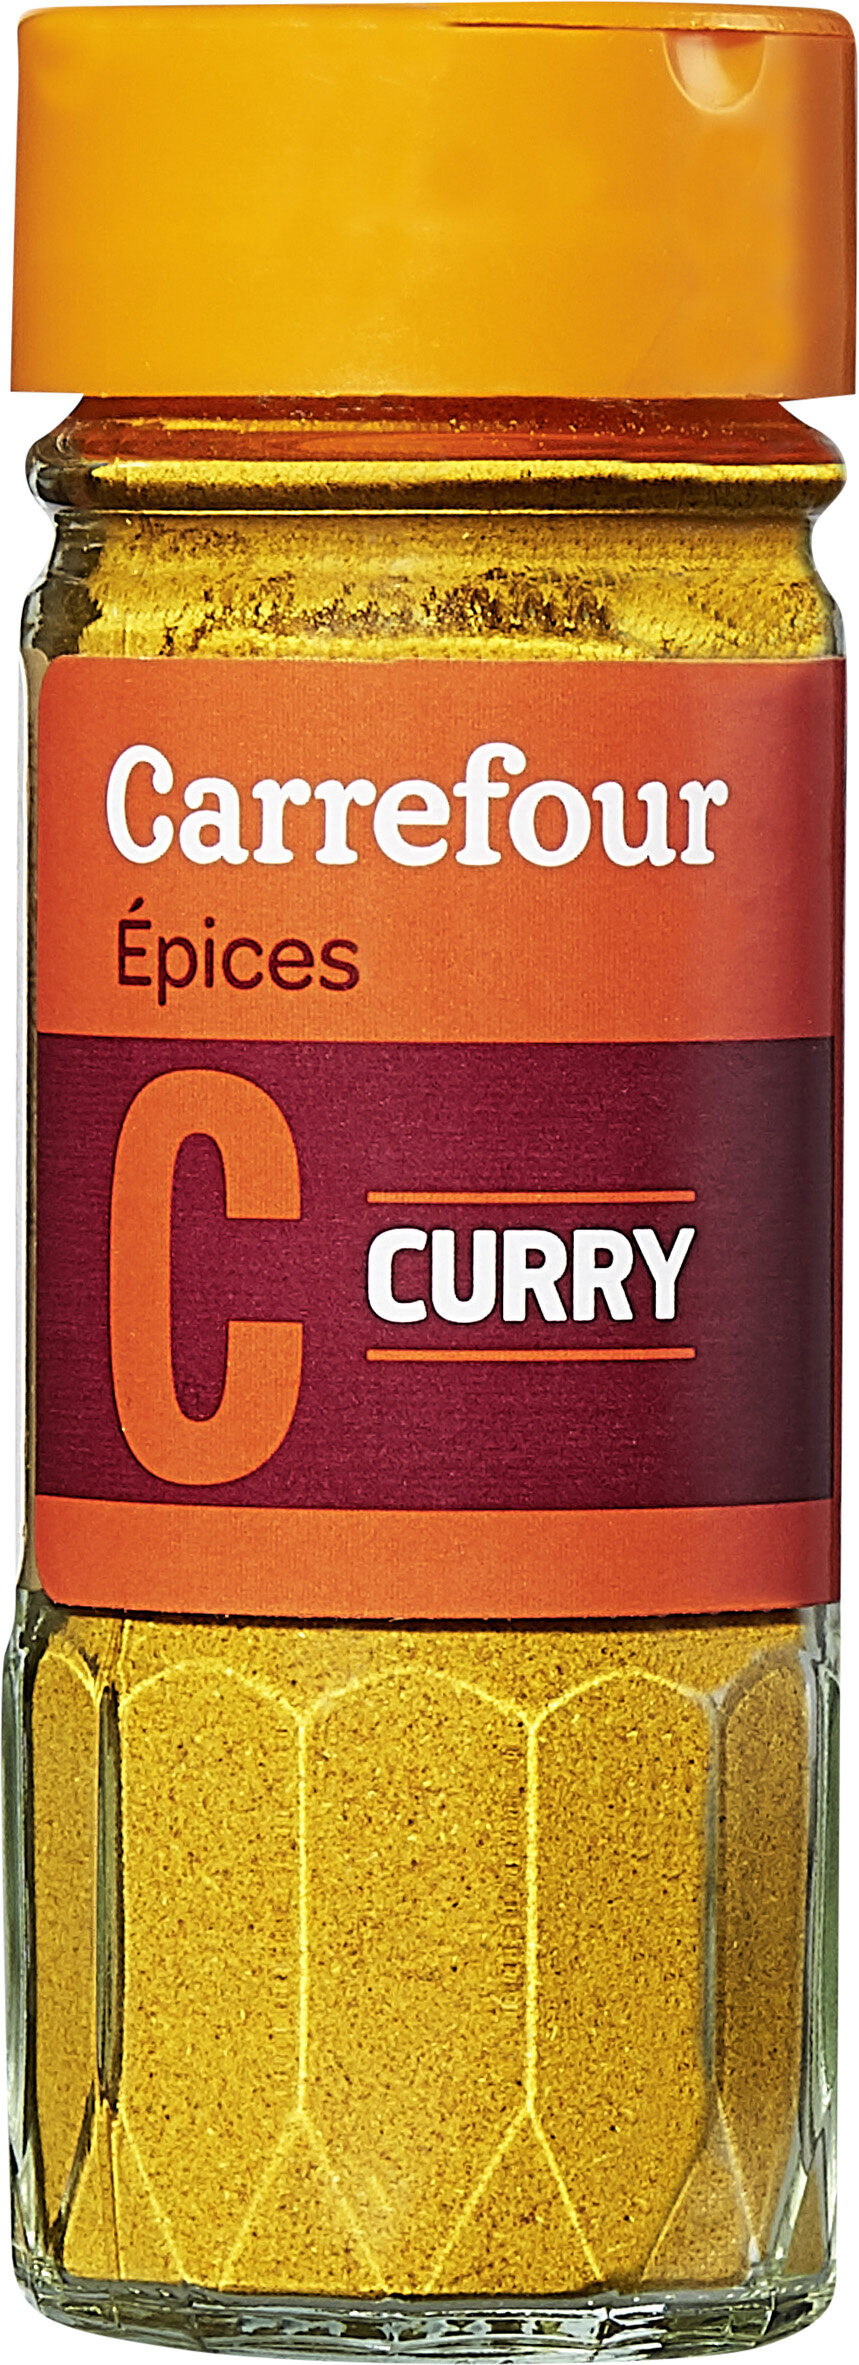 Curry - Product - fr